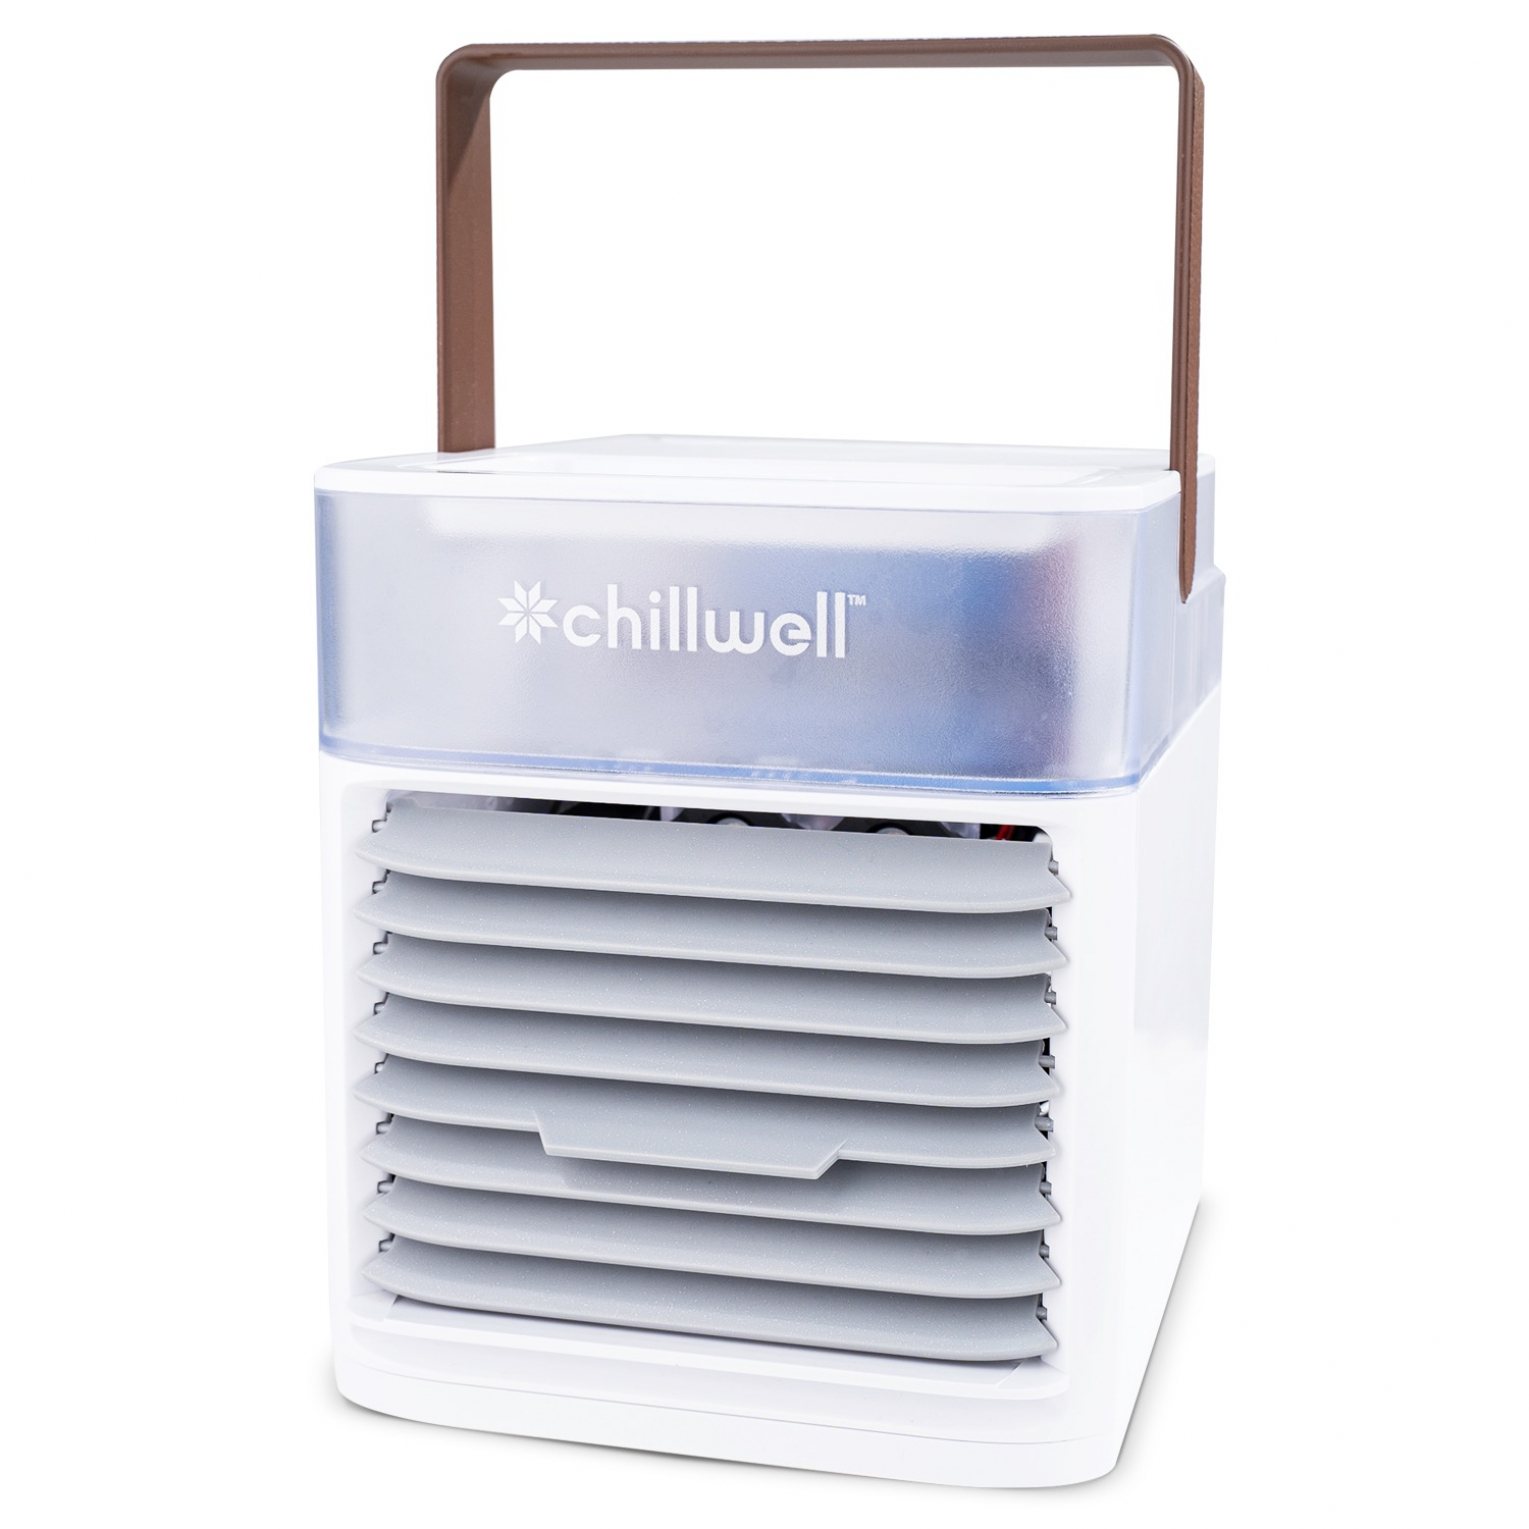 How To Charge Chillwell AC Cooler